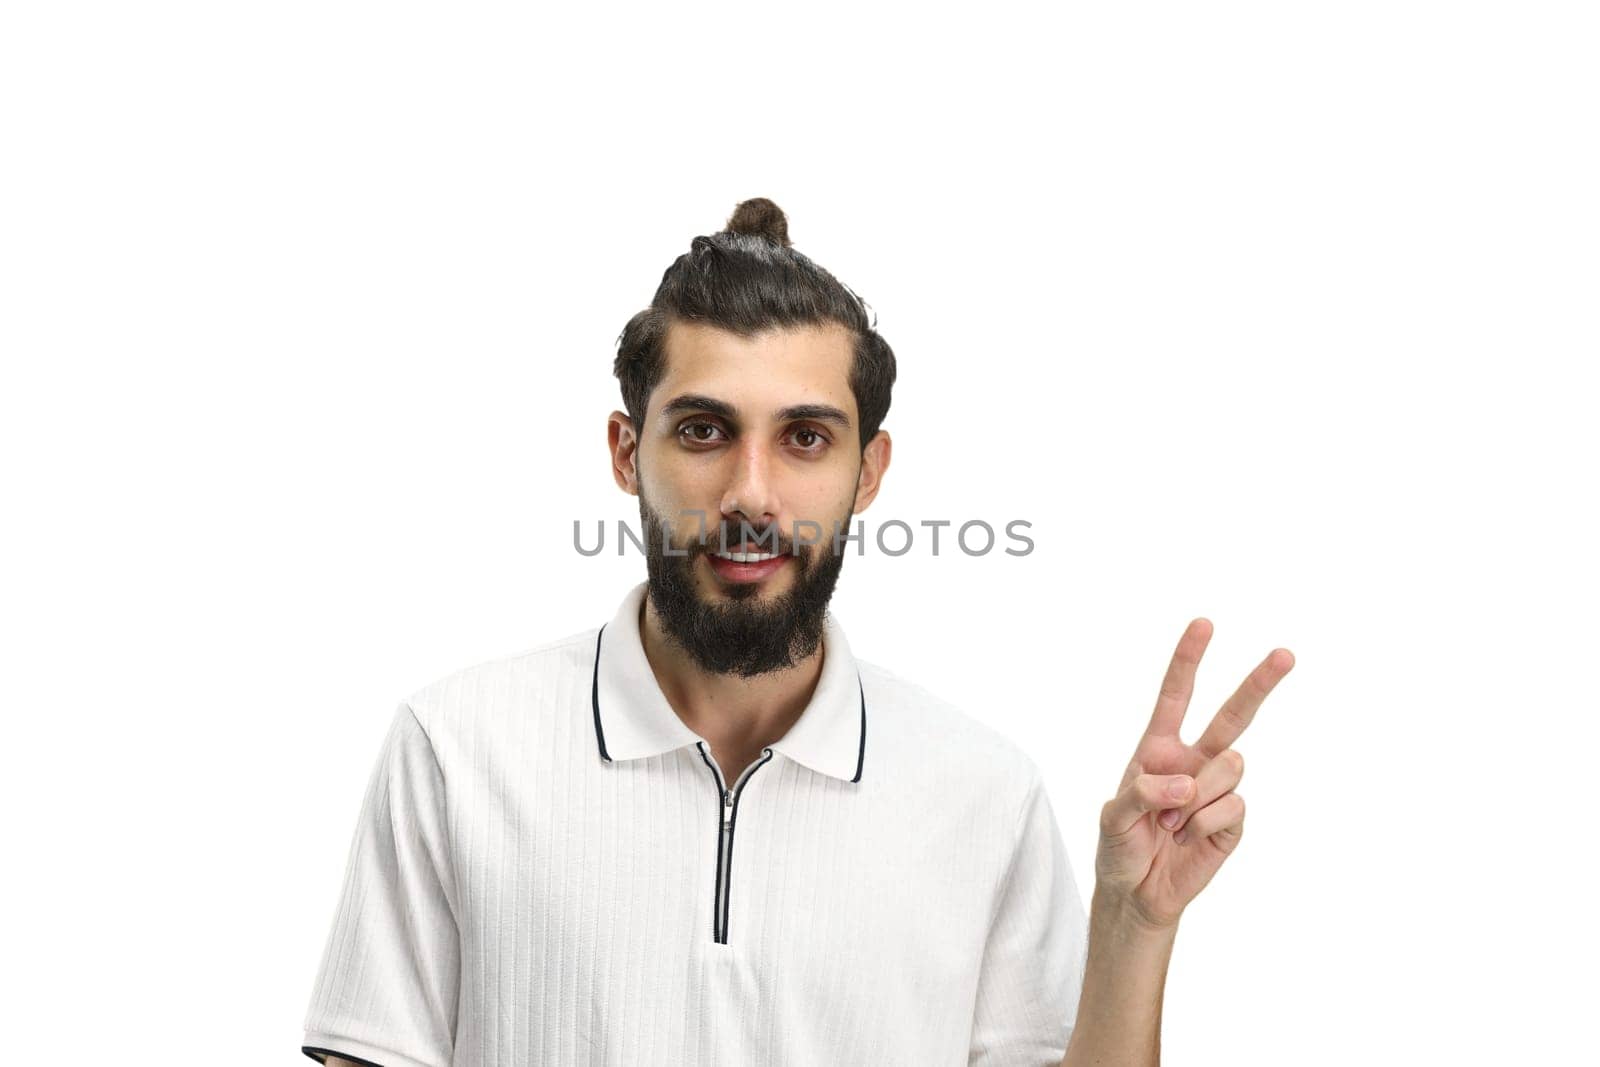 A man, close-up, on a white background, shows a victory sign.